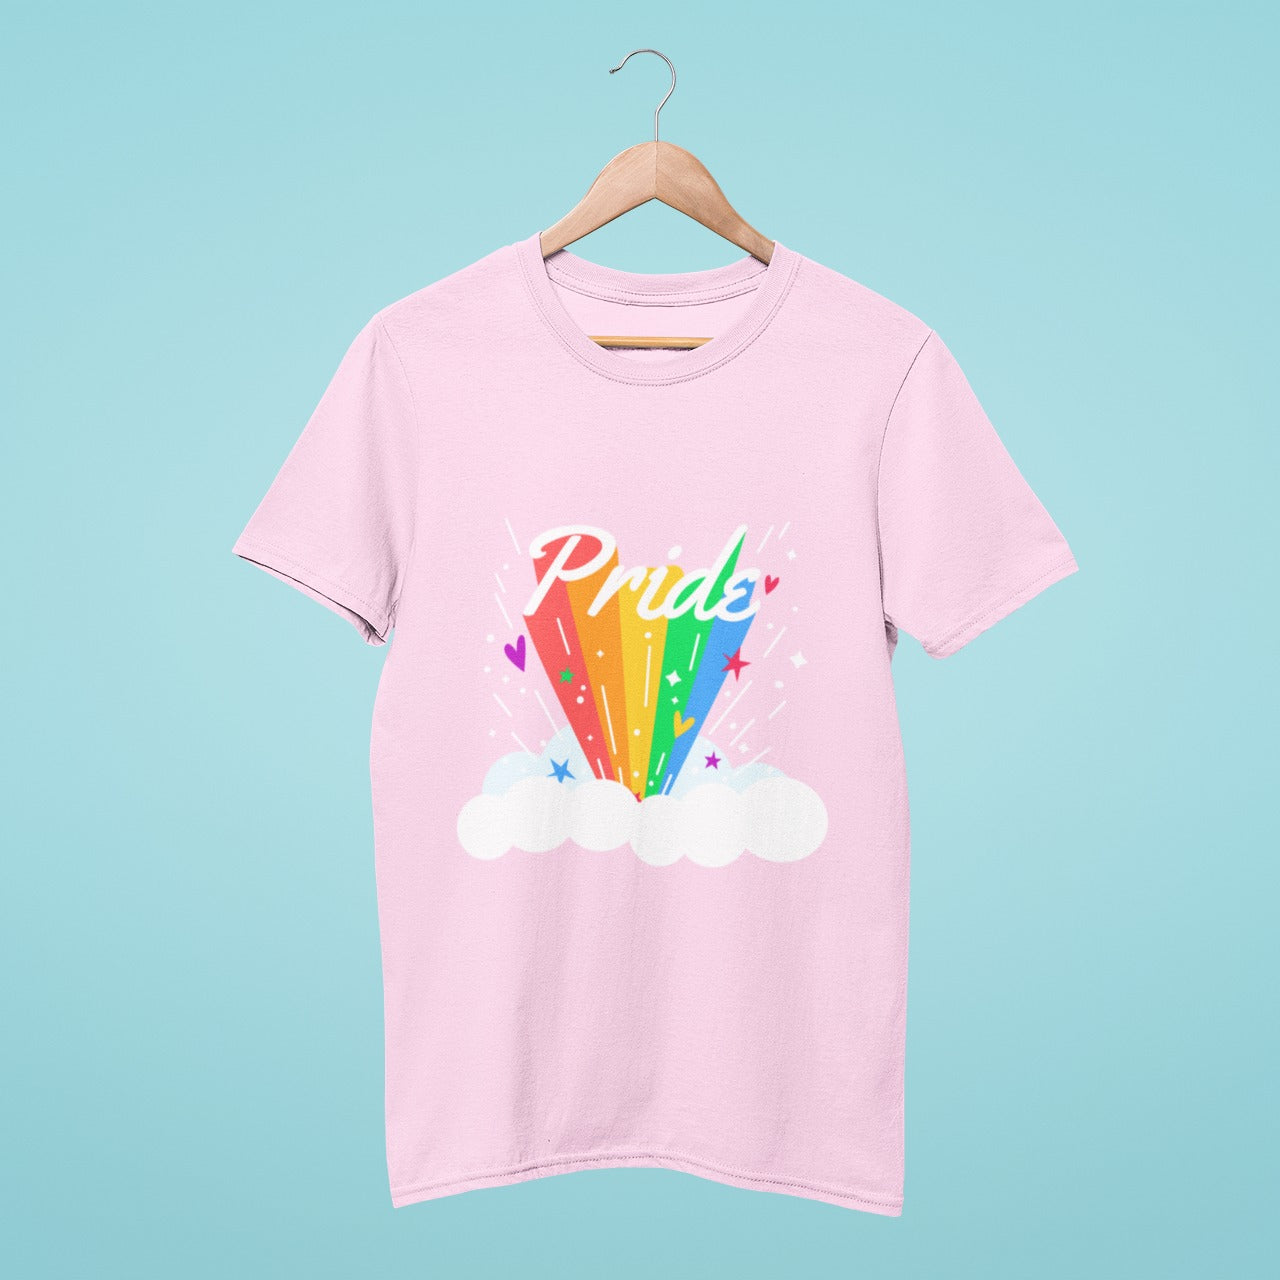 This vibrant pink t-shirt with a "Pride" design emerging from a cloud with a rainbow trail is the perfect way to show your support for the LGBTQ+ community. The stylish and colorful design will make you stand out in any crowd. Available in comfortable fabric, this tee is perfect for any casual occasion, from Pride events to everyday wear. Show your support and pride with this unique and eye-catching tee.